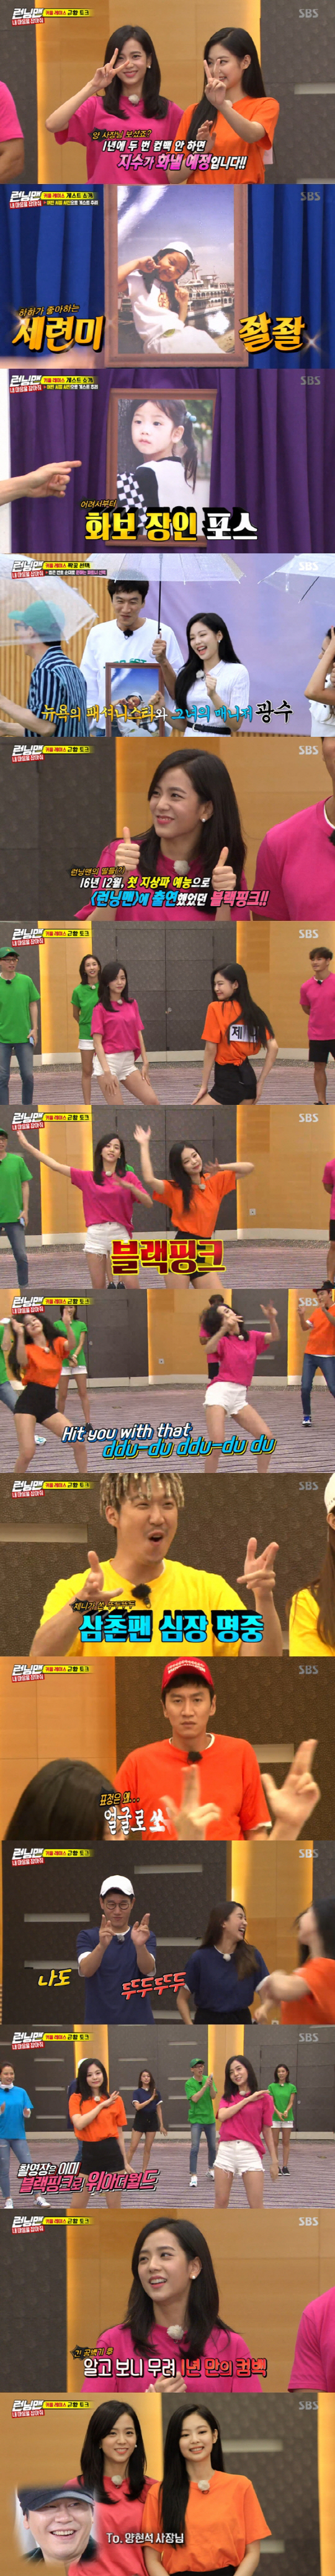 Black Pinks Jenny Kim and JiSoooo asked Yang Hyun-suk boss to make it come back twice a year.SBS Running Man, which was broadcast on the 15th, was featured in the water park as a summer feature, and Black Pink JiSooo, Jenny Kim, Han Eun Jung, Bora, Hwang Chi Yeol and Pyo Ye-jin appeared.On the day of Running Man, pictures of the young performers of women were released.In particular, Jenny Kim proved to be a mother-of-pearl beauty with a small face and distinctive features that are no different from the present in childhood photographs.In addition, a young JiSoooo with both branches caught his eye with a neat look.First, the couple race pair Choices took place. Choices the partner who wanted the number. Lee Kwang-soo was lucky.In the second order, I was paired with Jenny Kim and bought the envy of the members.When Jenny Kim appeared behind the curtain, Haha certified that she was a fan, saying, Jenny Kim is completely sophisticated, and I think she came to New York (just by looking at it).Kim Jong Kook also showed great satisfaction in selecting a partner by running to JiSoooo for a month.JiSoooo and Jenny Kim also showed Tududou Dudu, which is sweeping various music broadcasts, in Running Man.My uncle fans were excited to follow the choreography of shooting Tududududou.Asked how hed been, Black Pink JiSoooo and Jenny Kim said: I had a Blady in a year, I rested while preparing for the album.The members of the Black Pink fan exploded at the fact that Black Pink had a year of Blady.JiSoooo and Jenny Kim said, Hello, boss, let me come back twice a year.